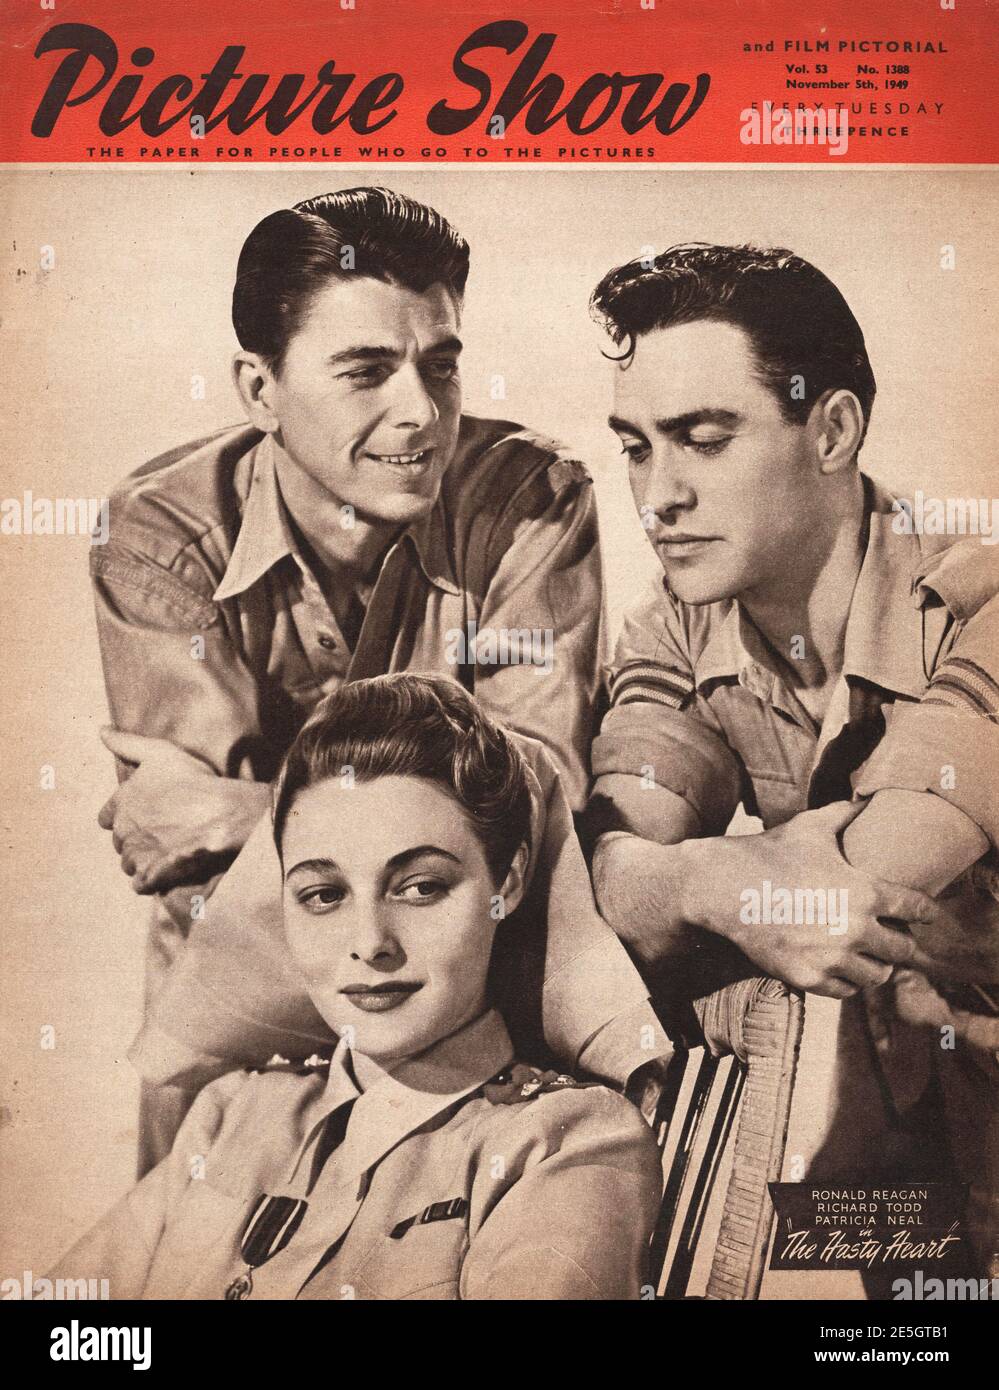 1949 Picture Show front cover Ronald Reagan, Richard Todd, Patricia Neal Stock Photo